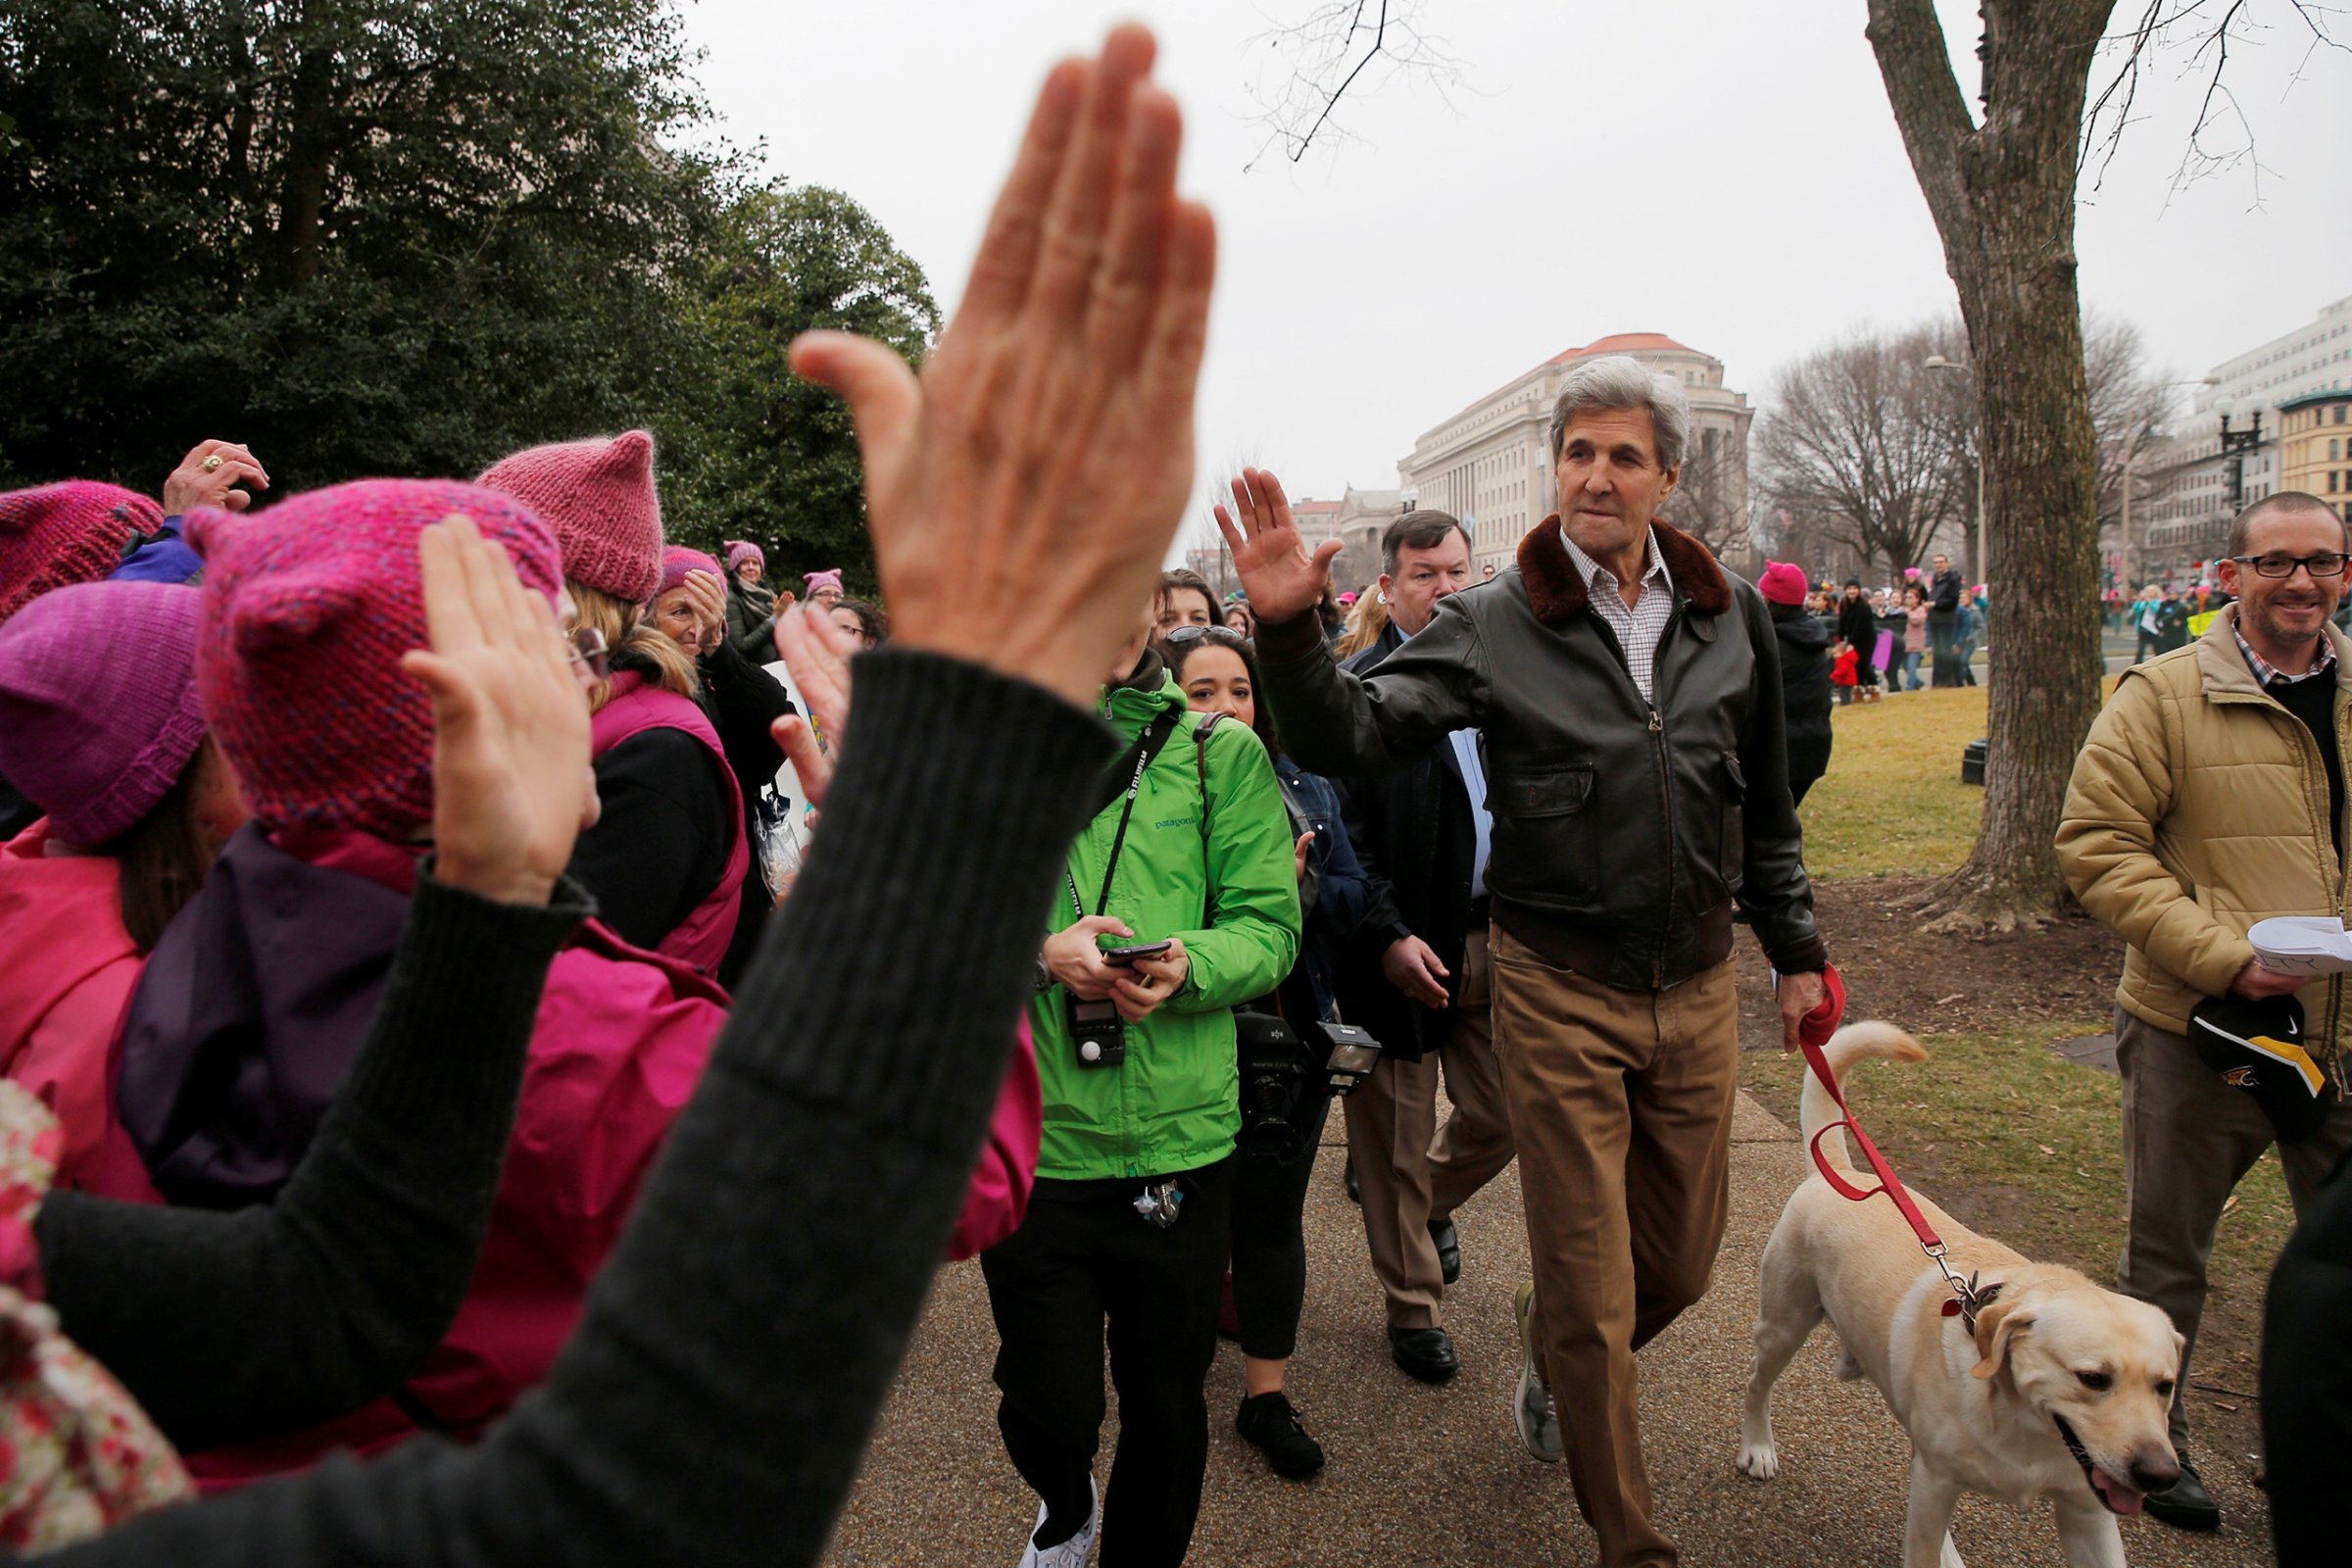 Former U.S. Secretary of State John Kerry walks his dog to join the Women's March on Washington, following the inauguration of U.S. President Donald Trump, on Jan. 21, 2017.